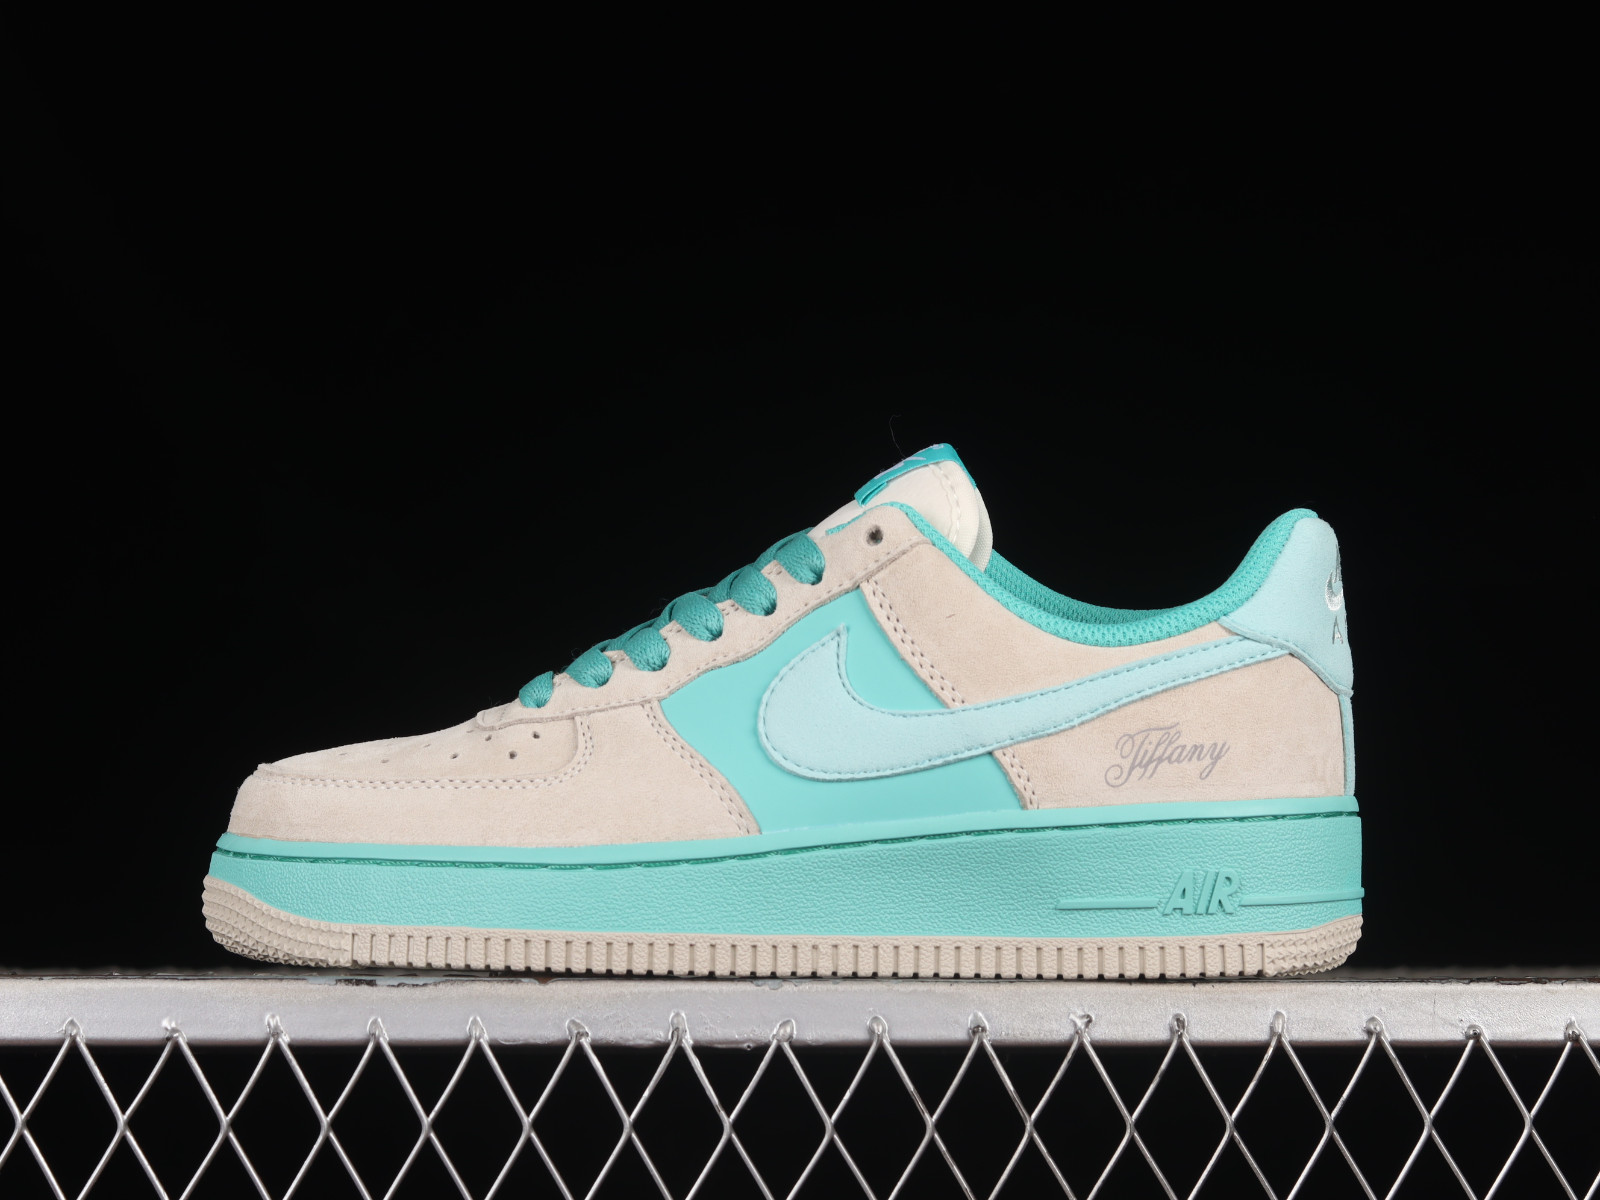 MultiscaleconsultingShops Tiffany & Co. x Nike Air 1 07 Low SP and Family Tiffany Blue DZ1382 - 222 - liberty air max 90